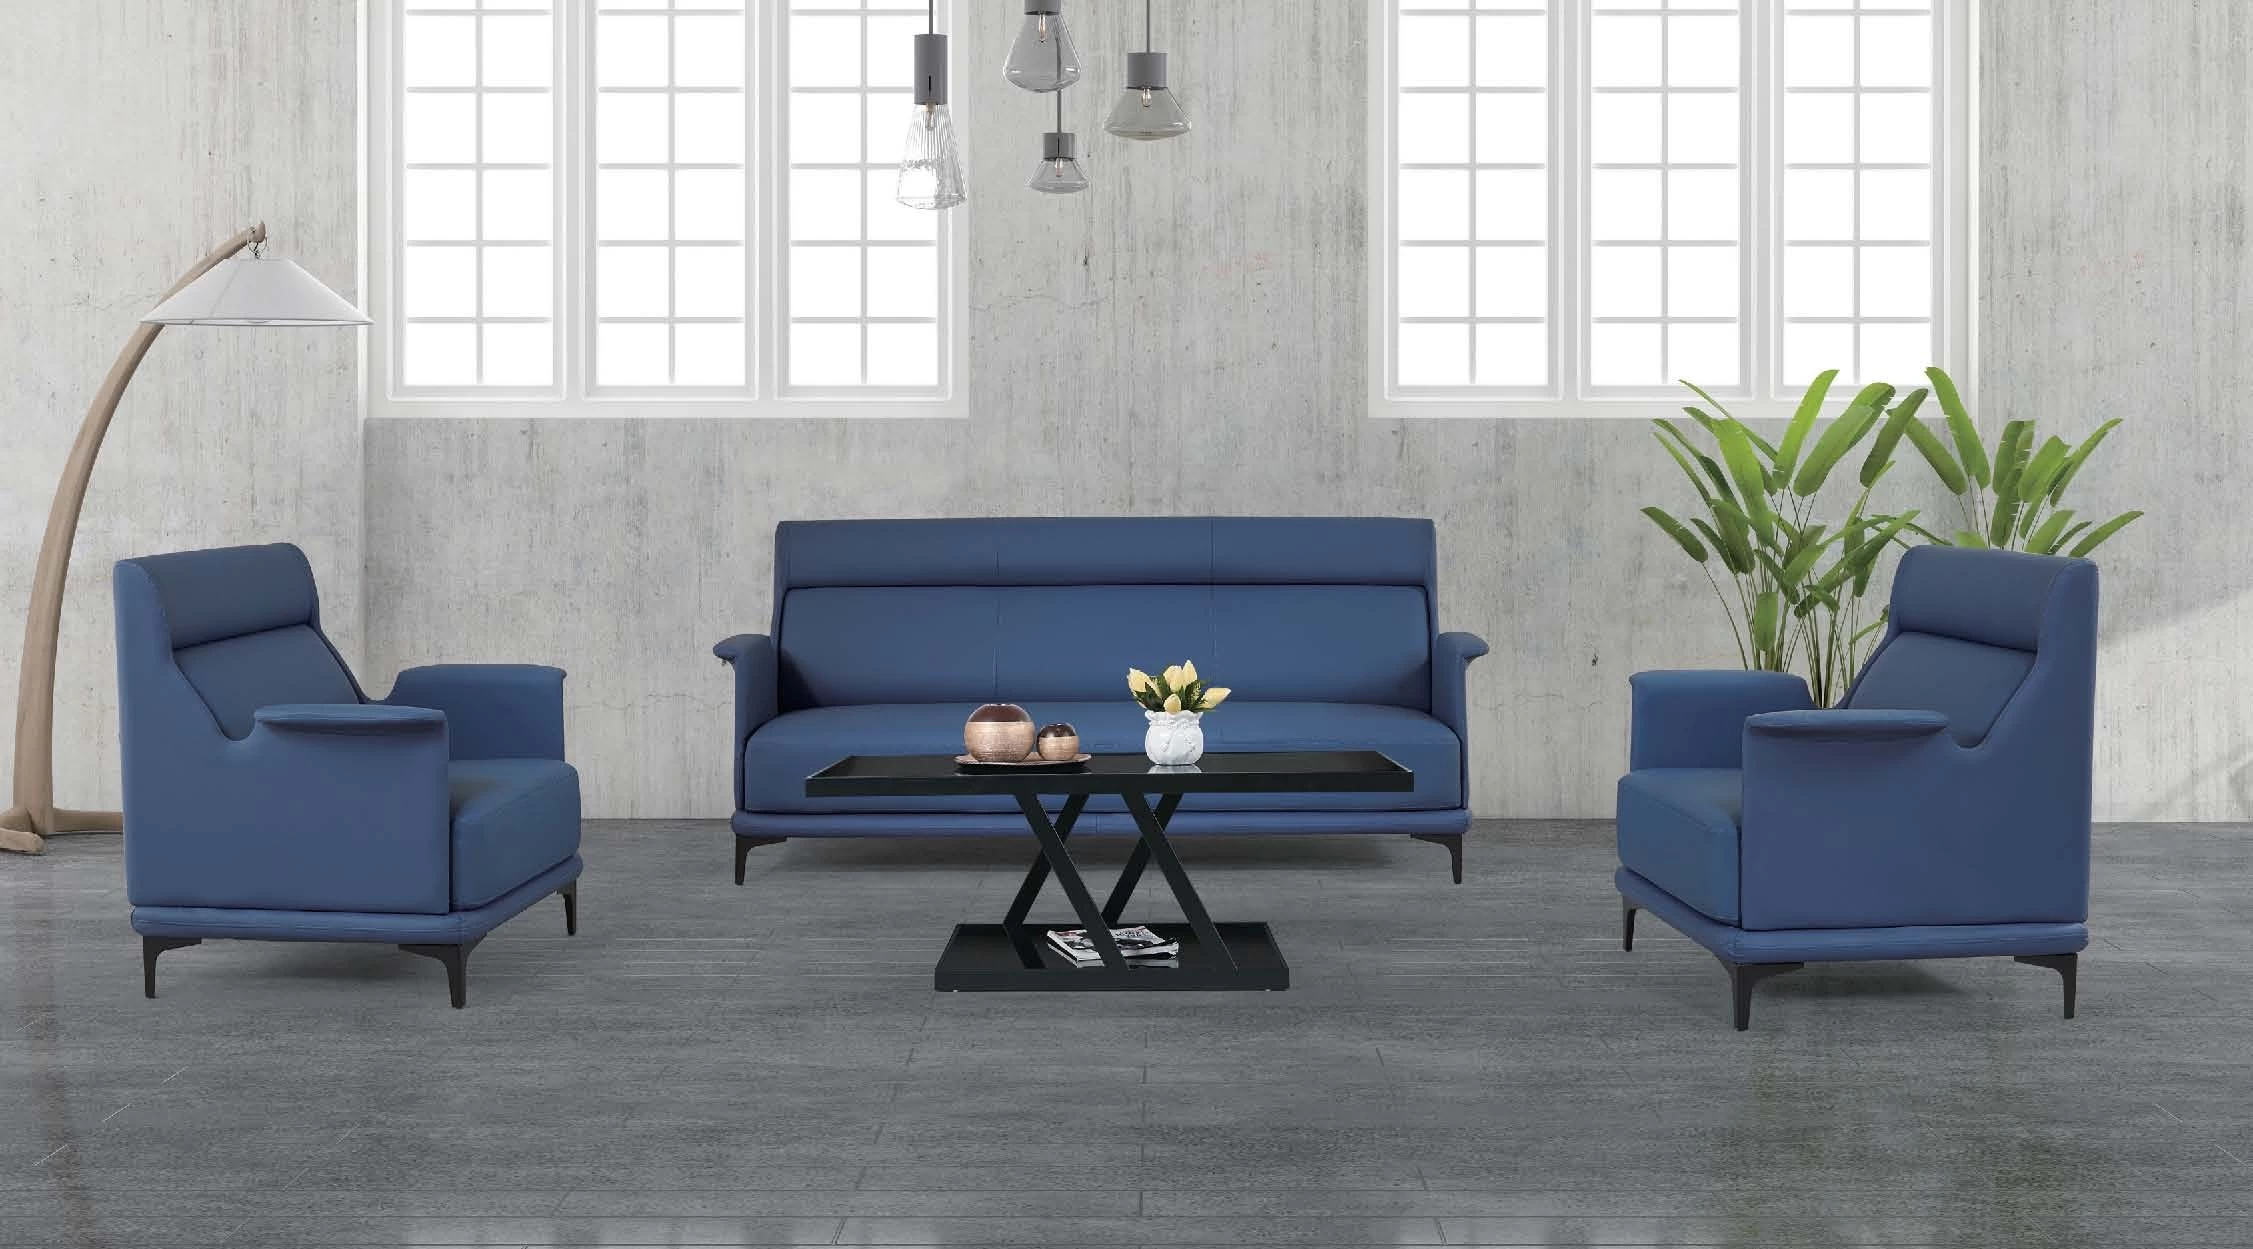 Newcity S-917-1 High Quality Pu Sofa Sturdy Wooden frame Metal Leg Bold and Retro Elegant Vintage Design Natural Leather Texture and Grain Office Sofa  Supplier Foshan China